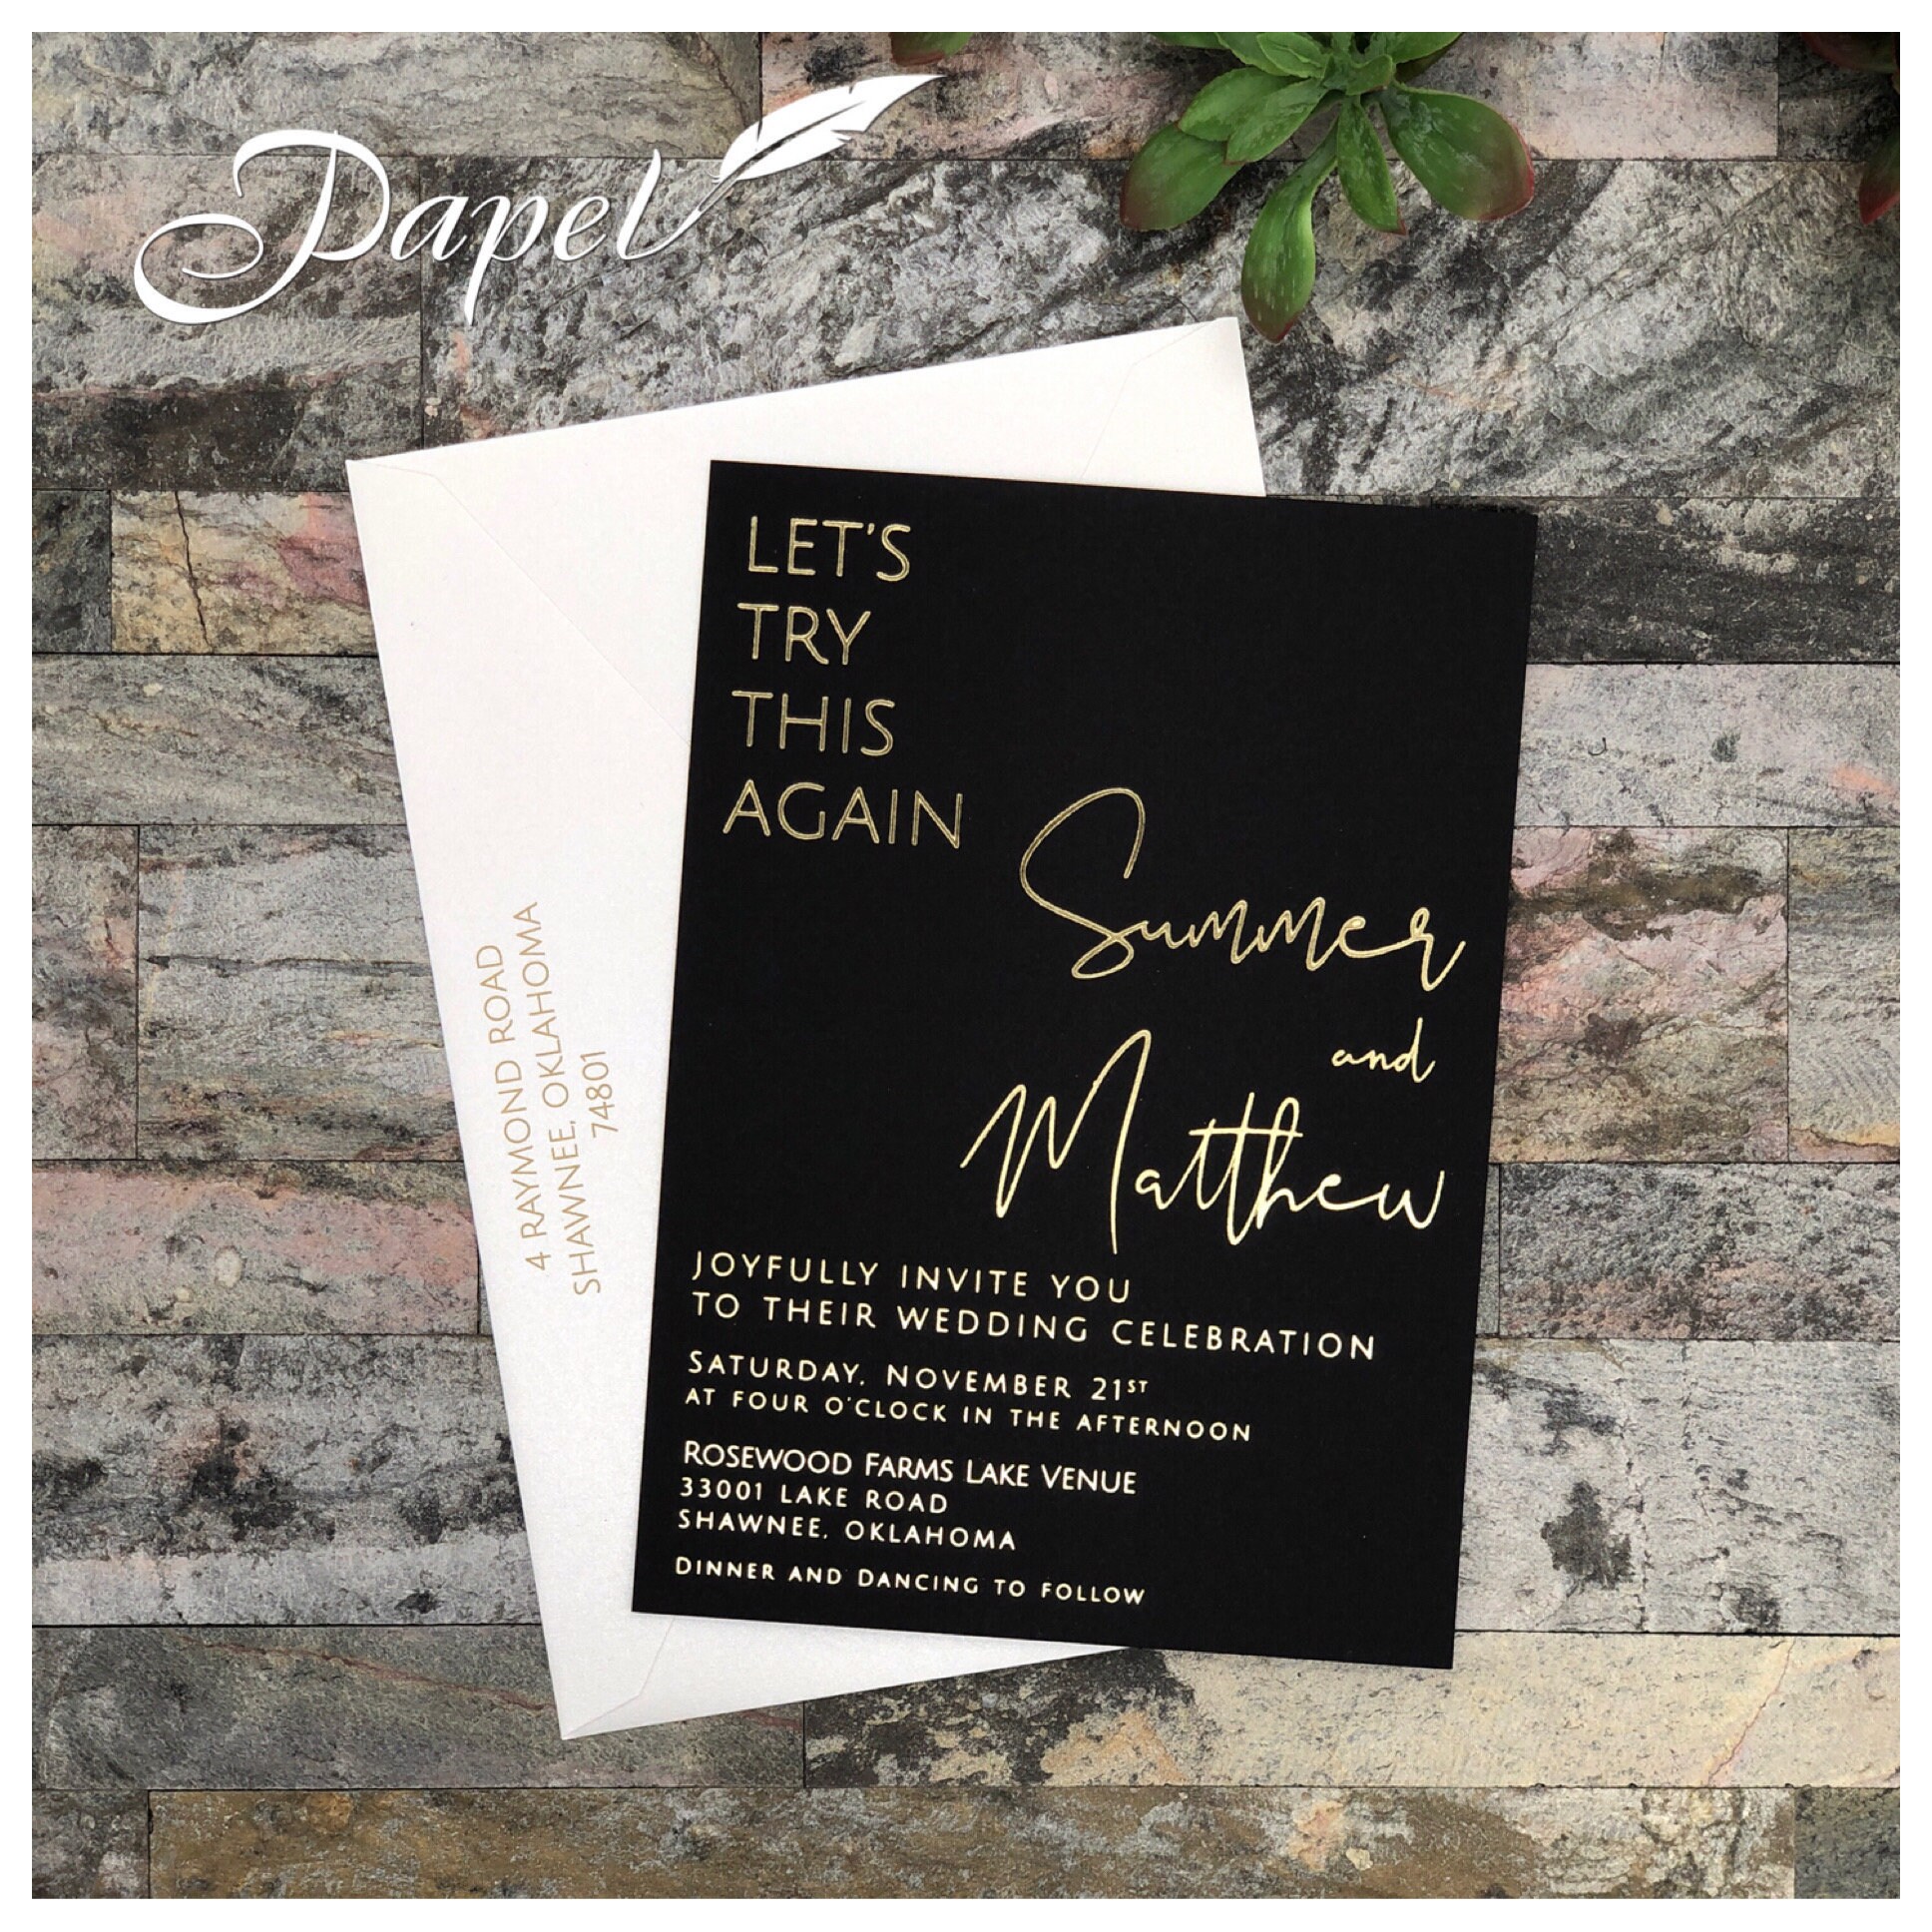 50 Wedding Invitation Cards size 5X7 Printed in Black with